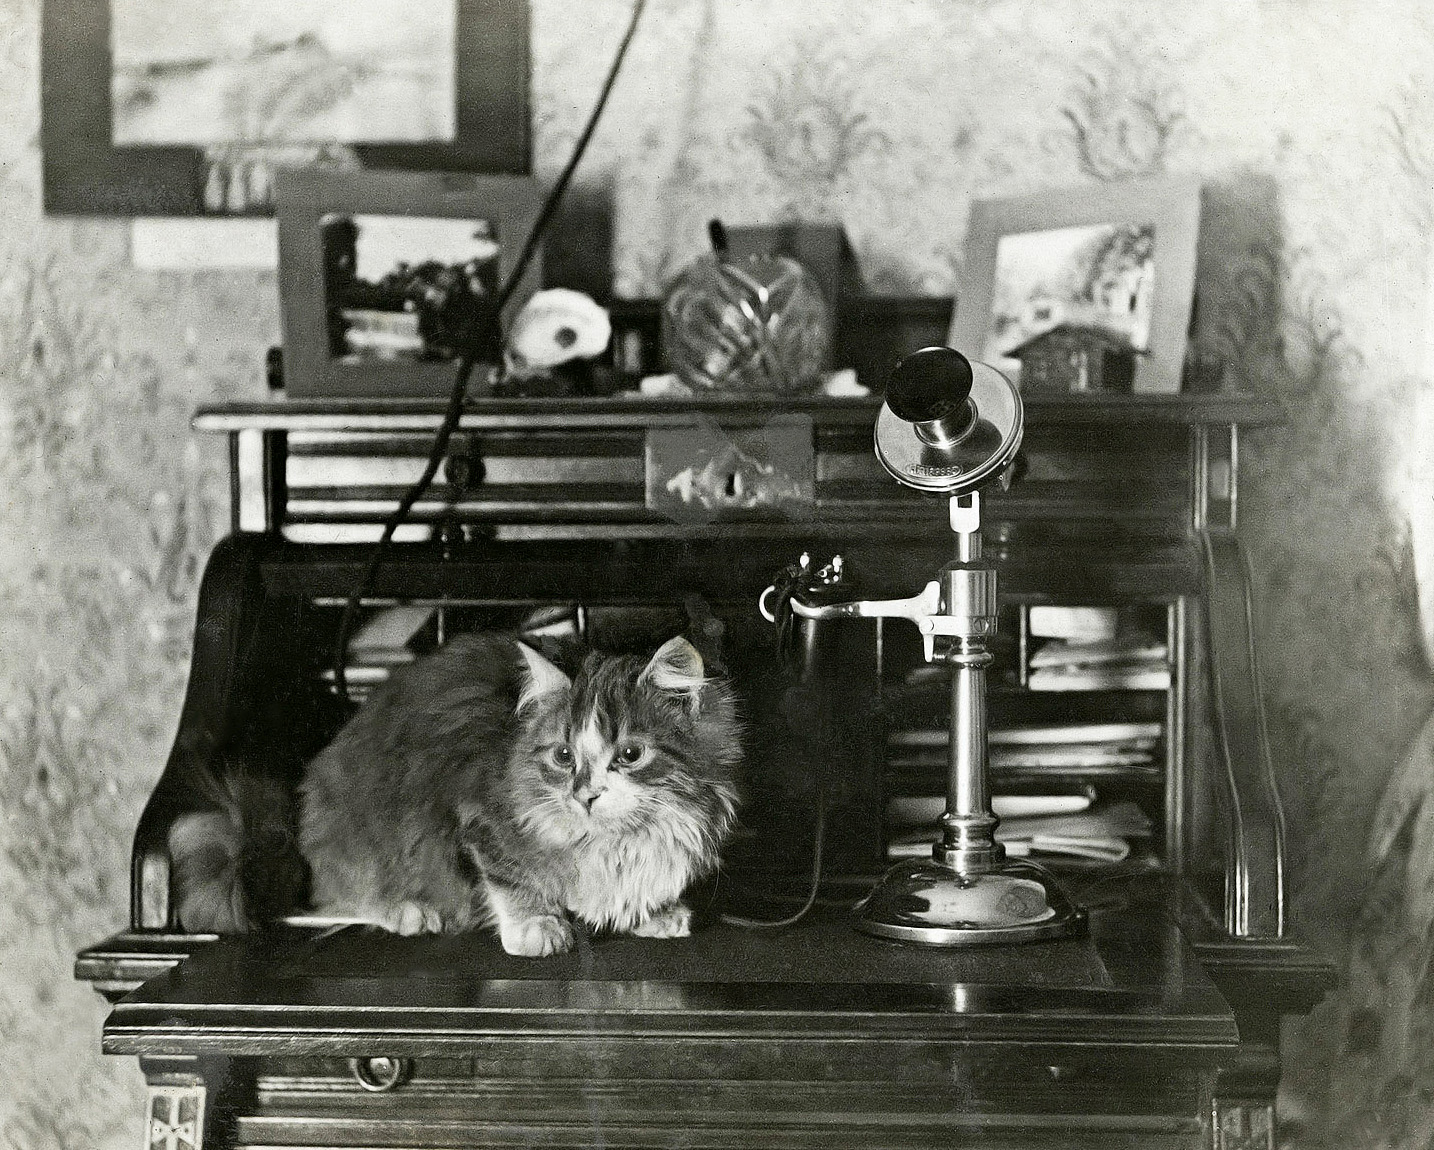 My great-great-grandmother's cat in 1913. View full size.